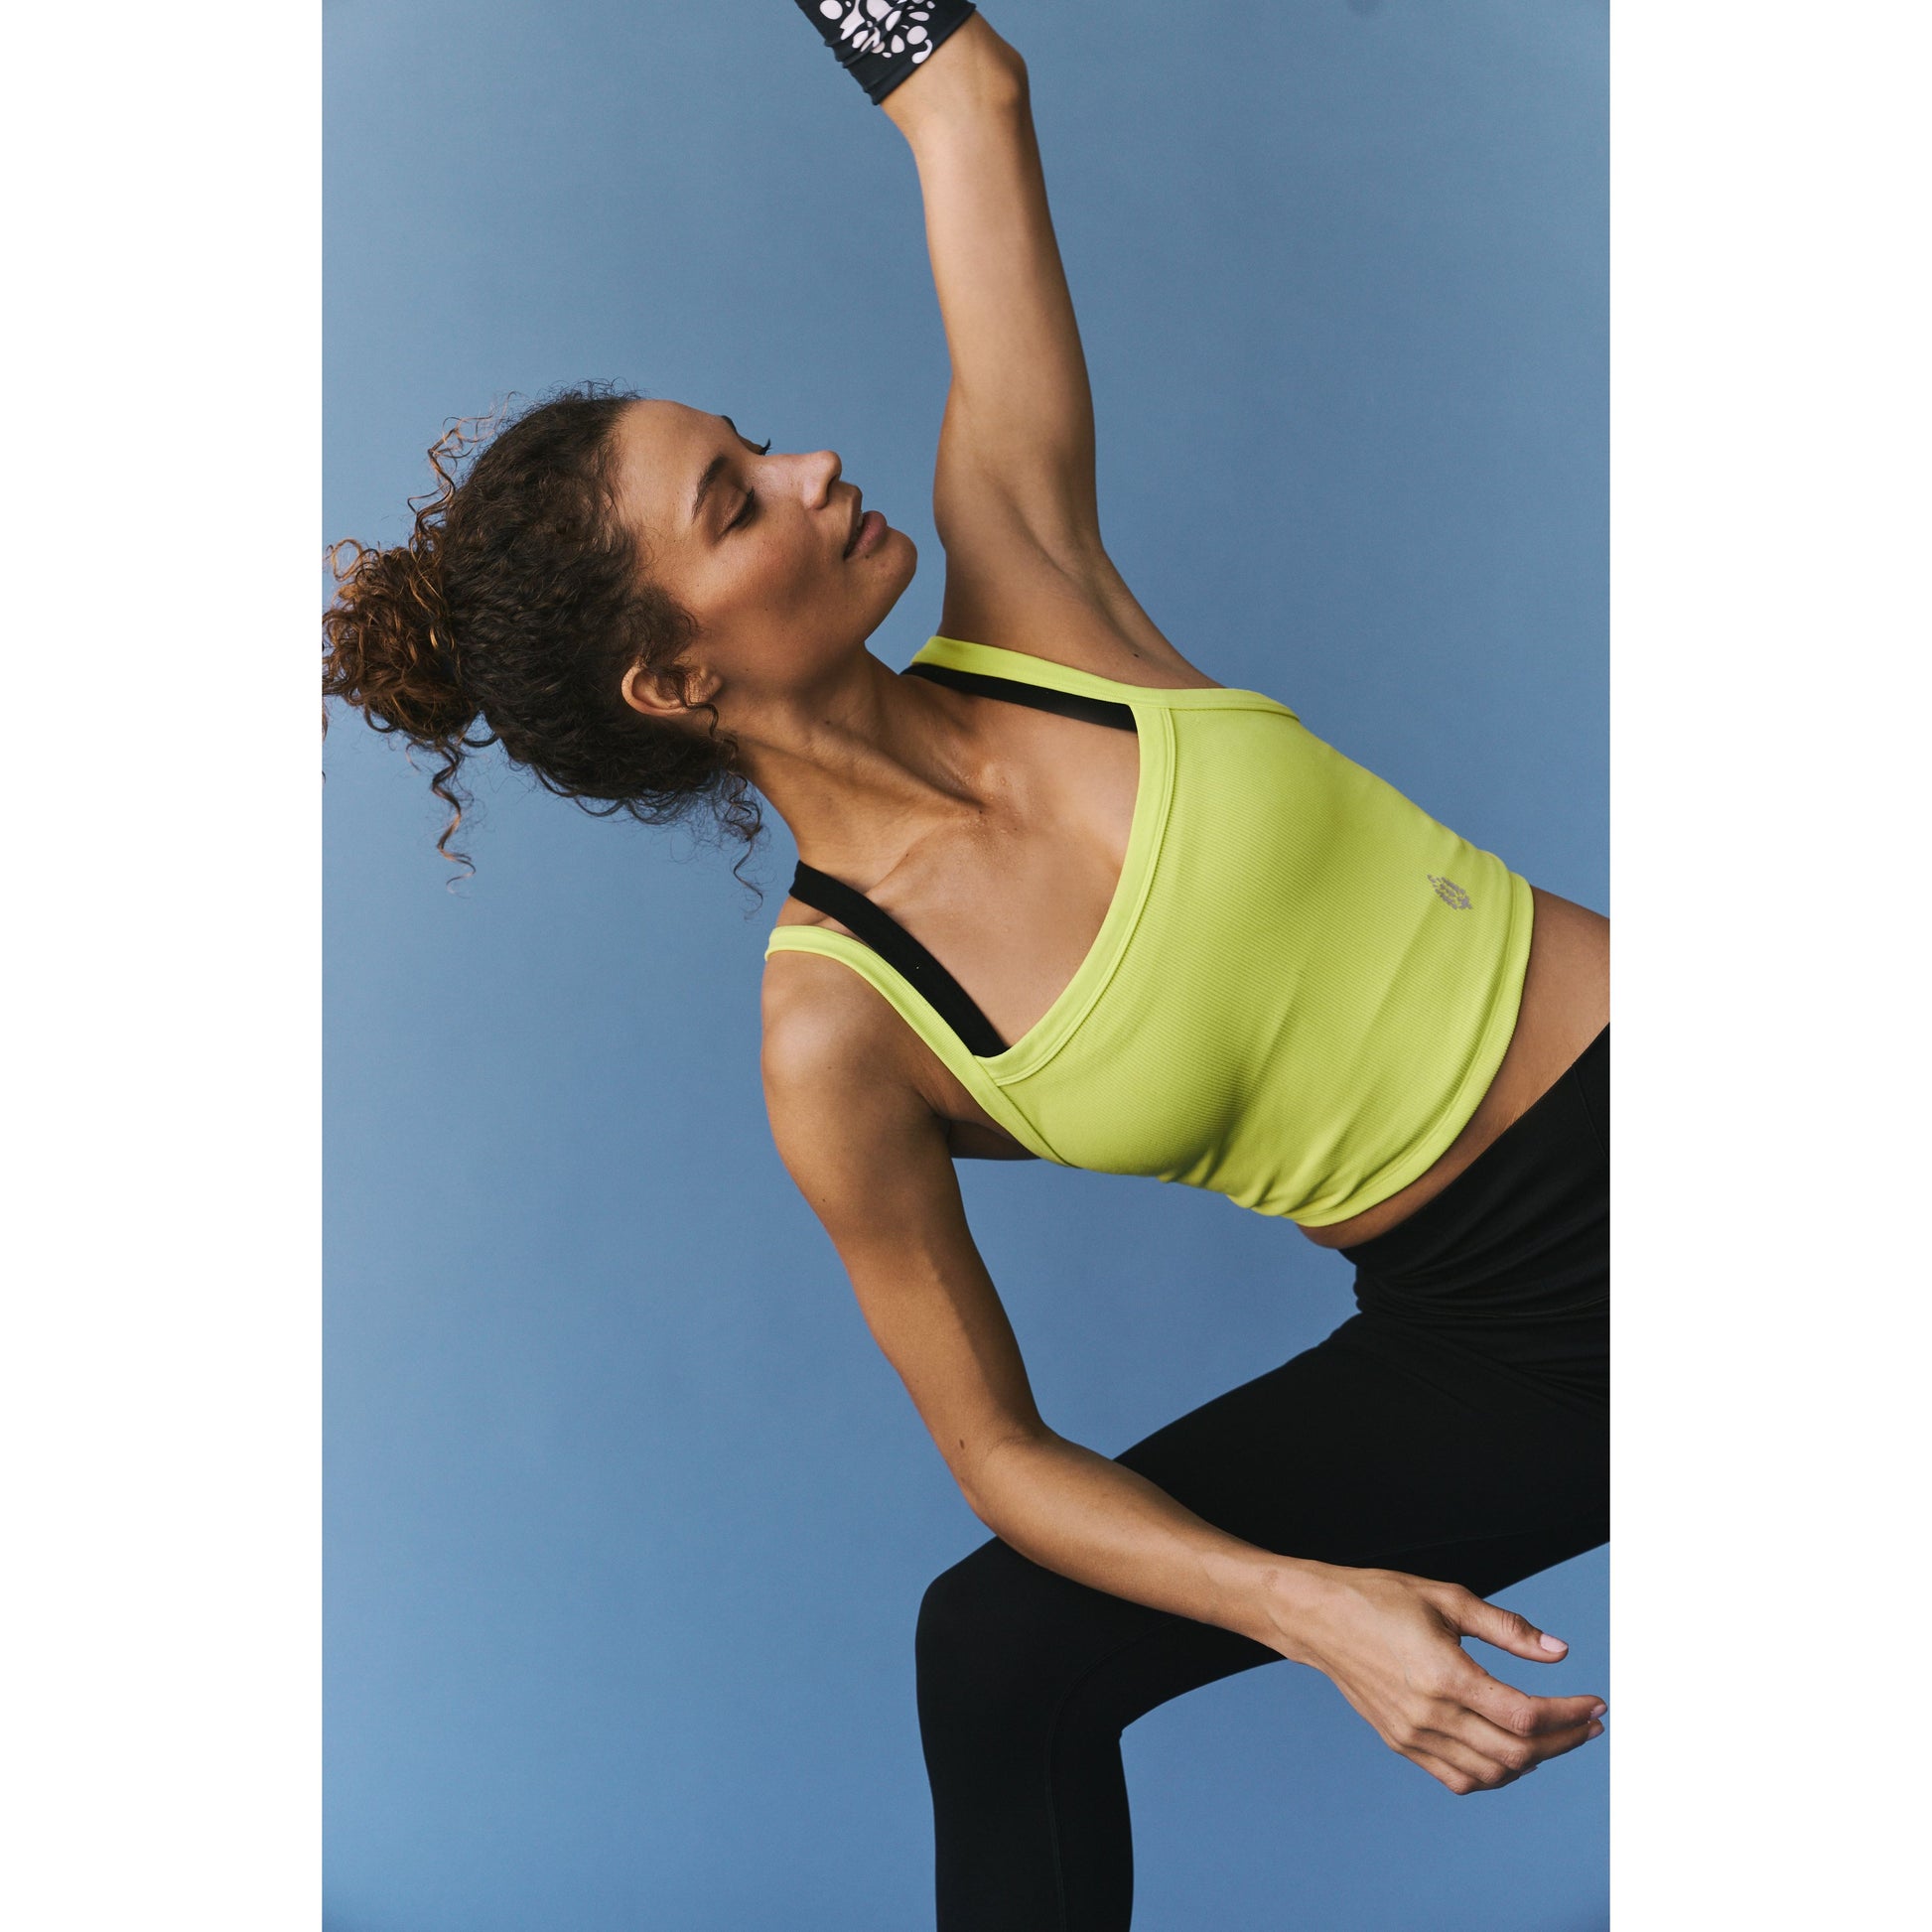 A woman in a Free People Movement lime green All Clear Cami Solid tank top and black leggings stretches her arm upwards while looking focused against a blue background.